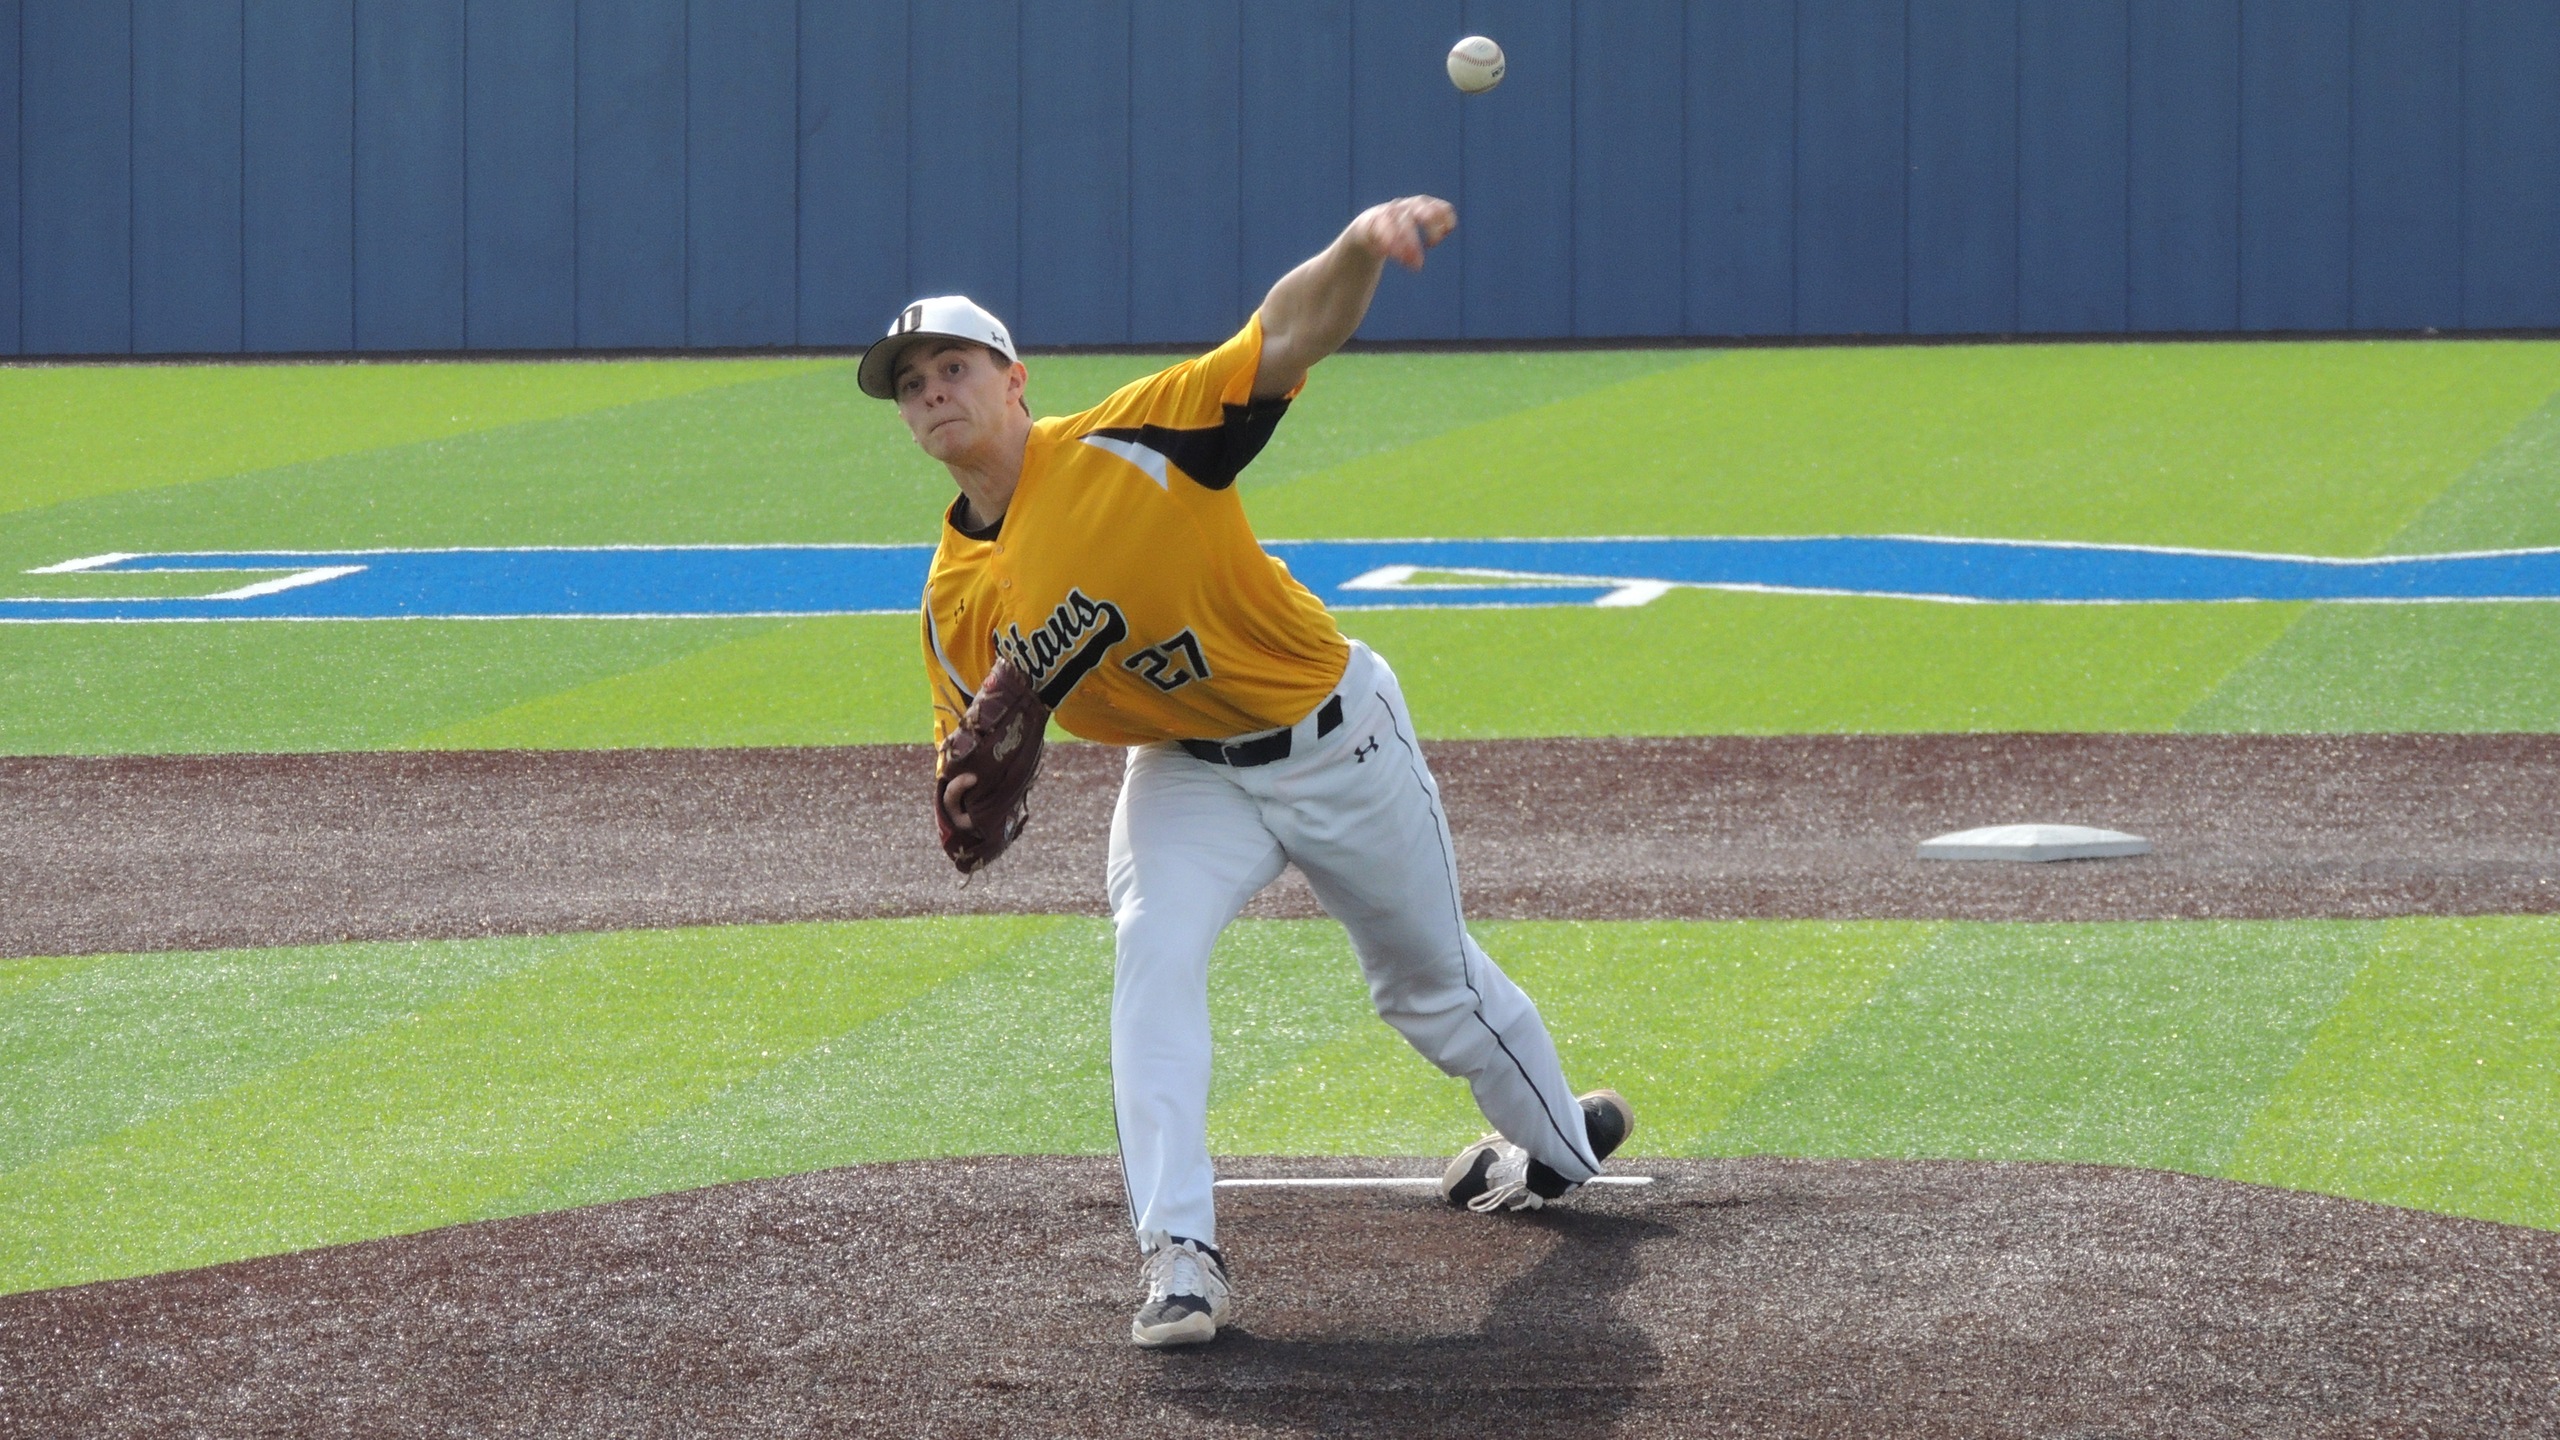 Cameron Mulvihill allowed just three hits and two earned runs during six innings of a starting assignment against the Kohawks.